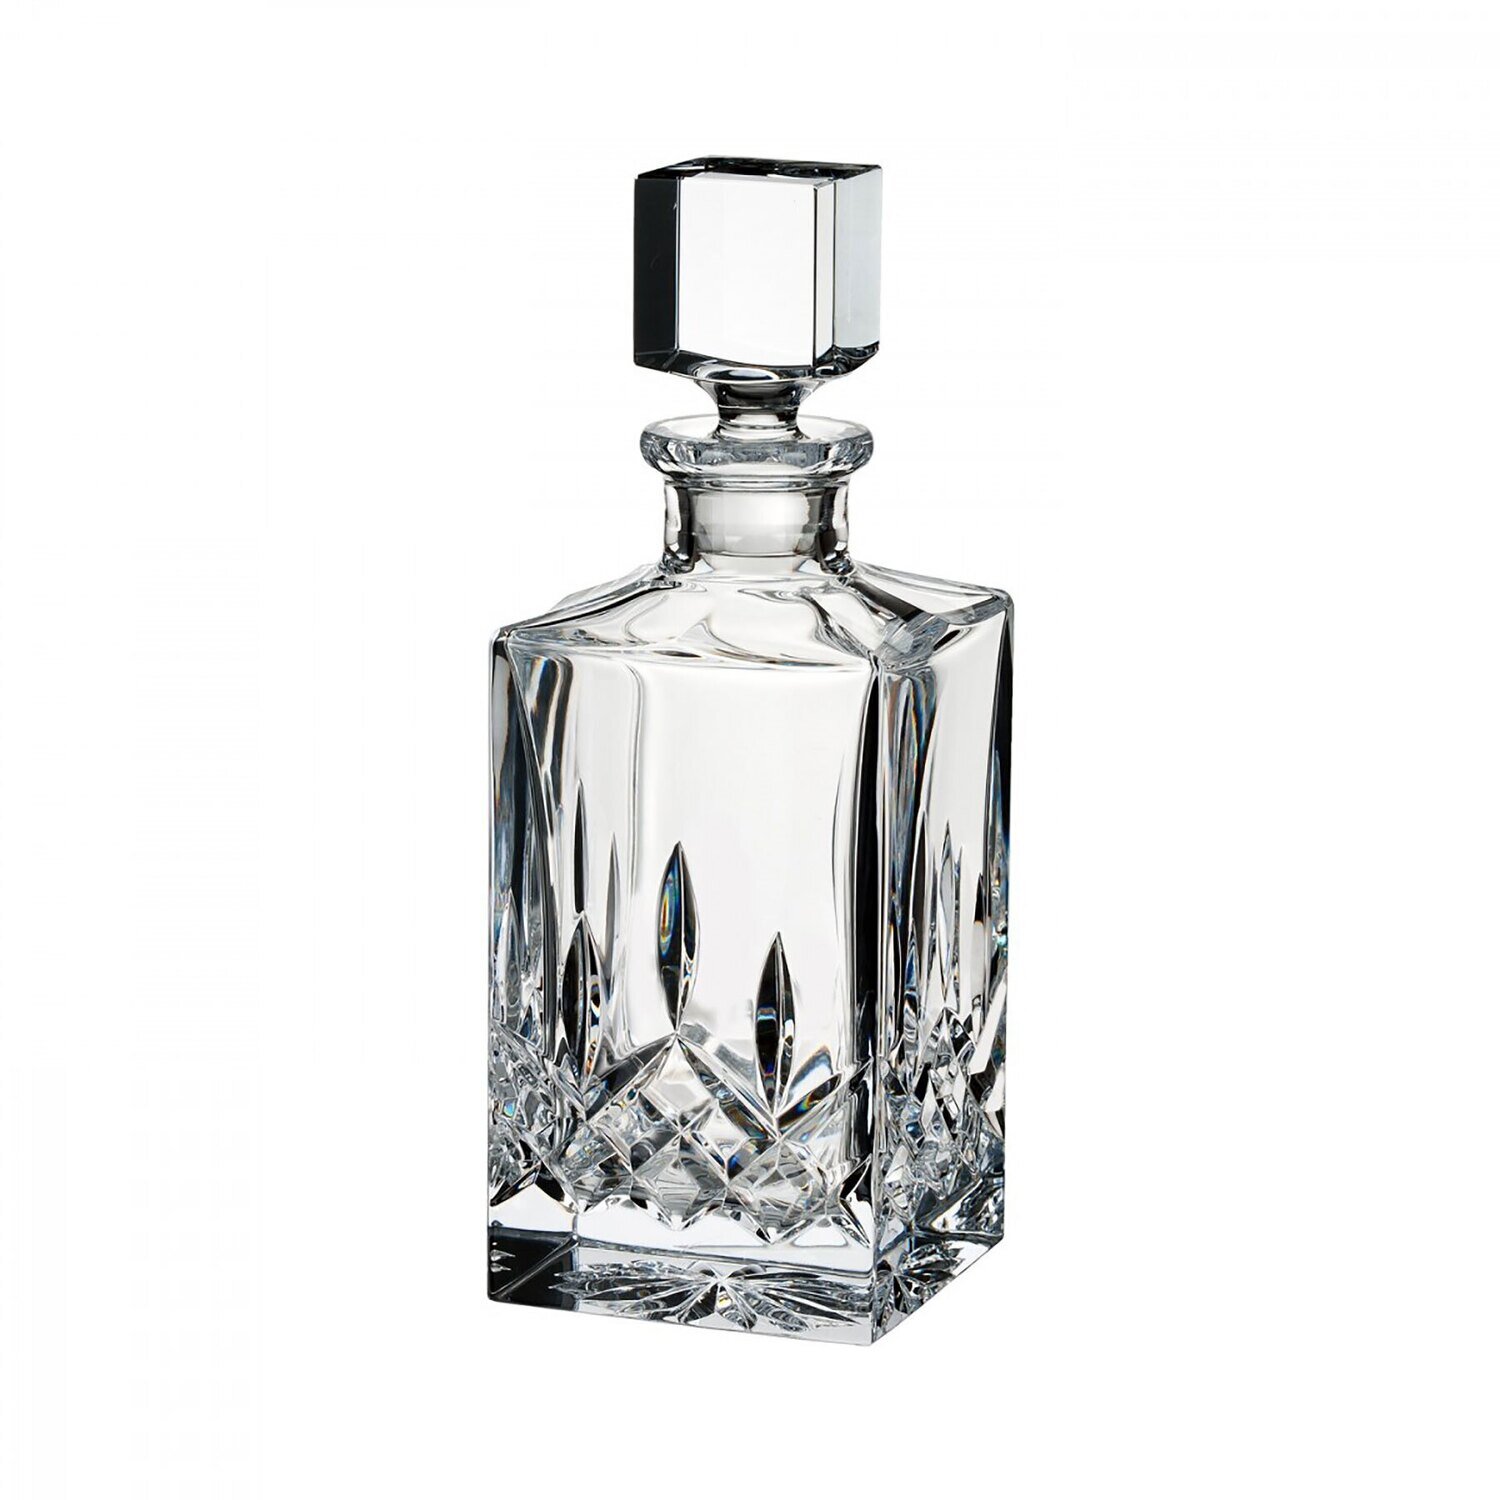 Waterford Lismore Decanter Square 26 Oz 40026625